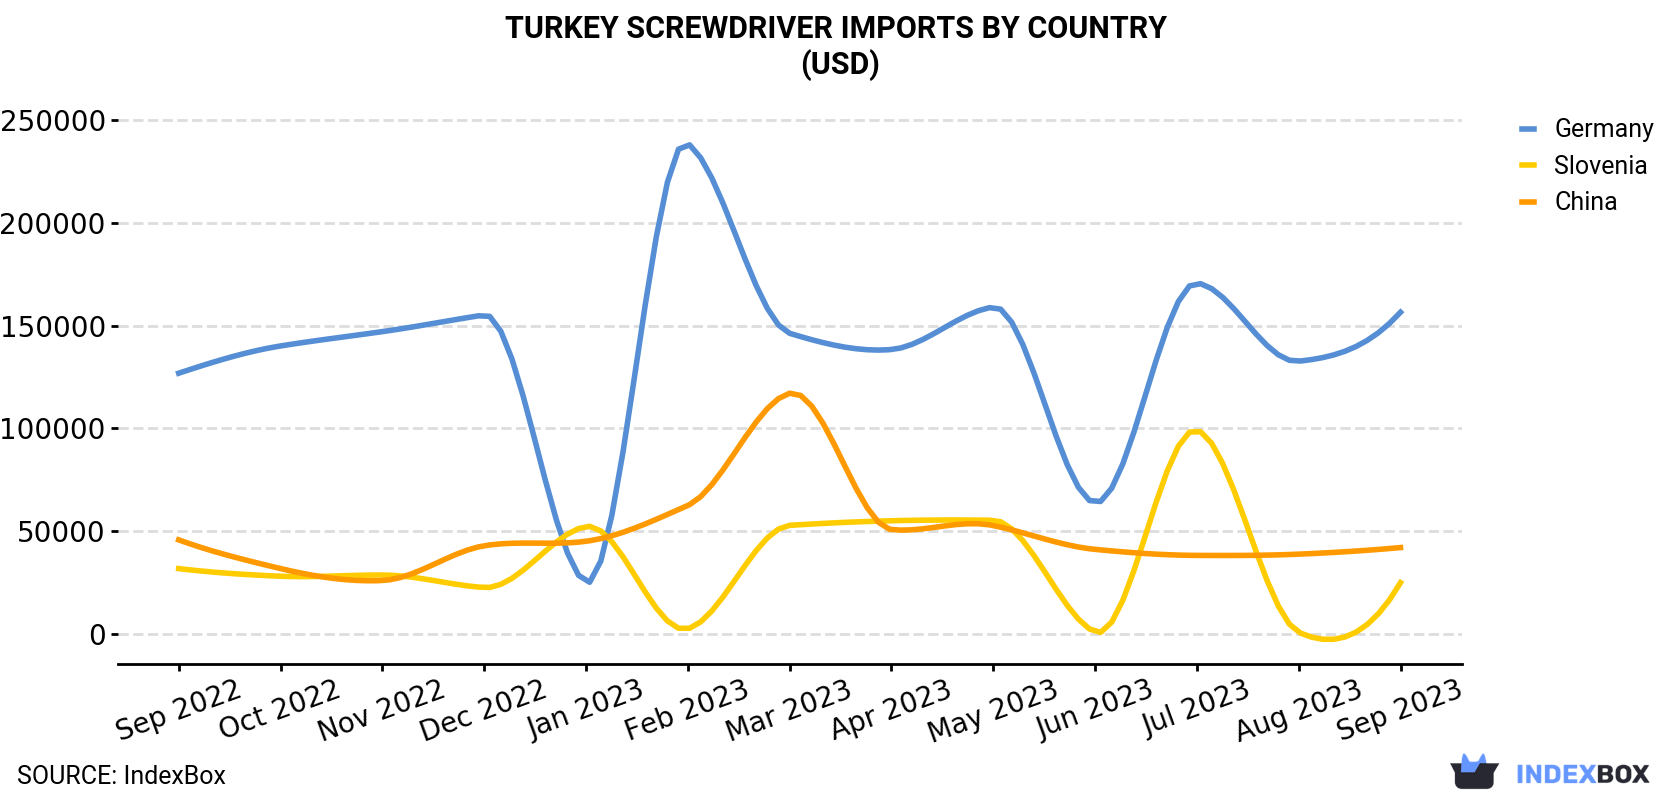 Turkey Screwdriver Imports By Country (USD)